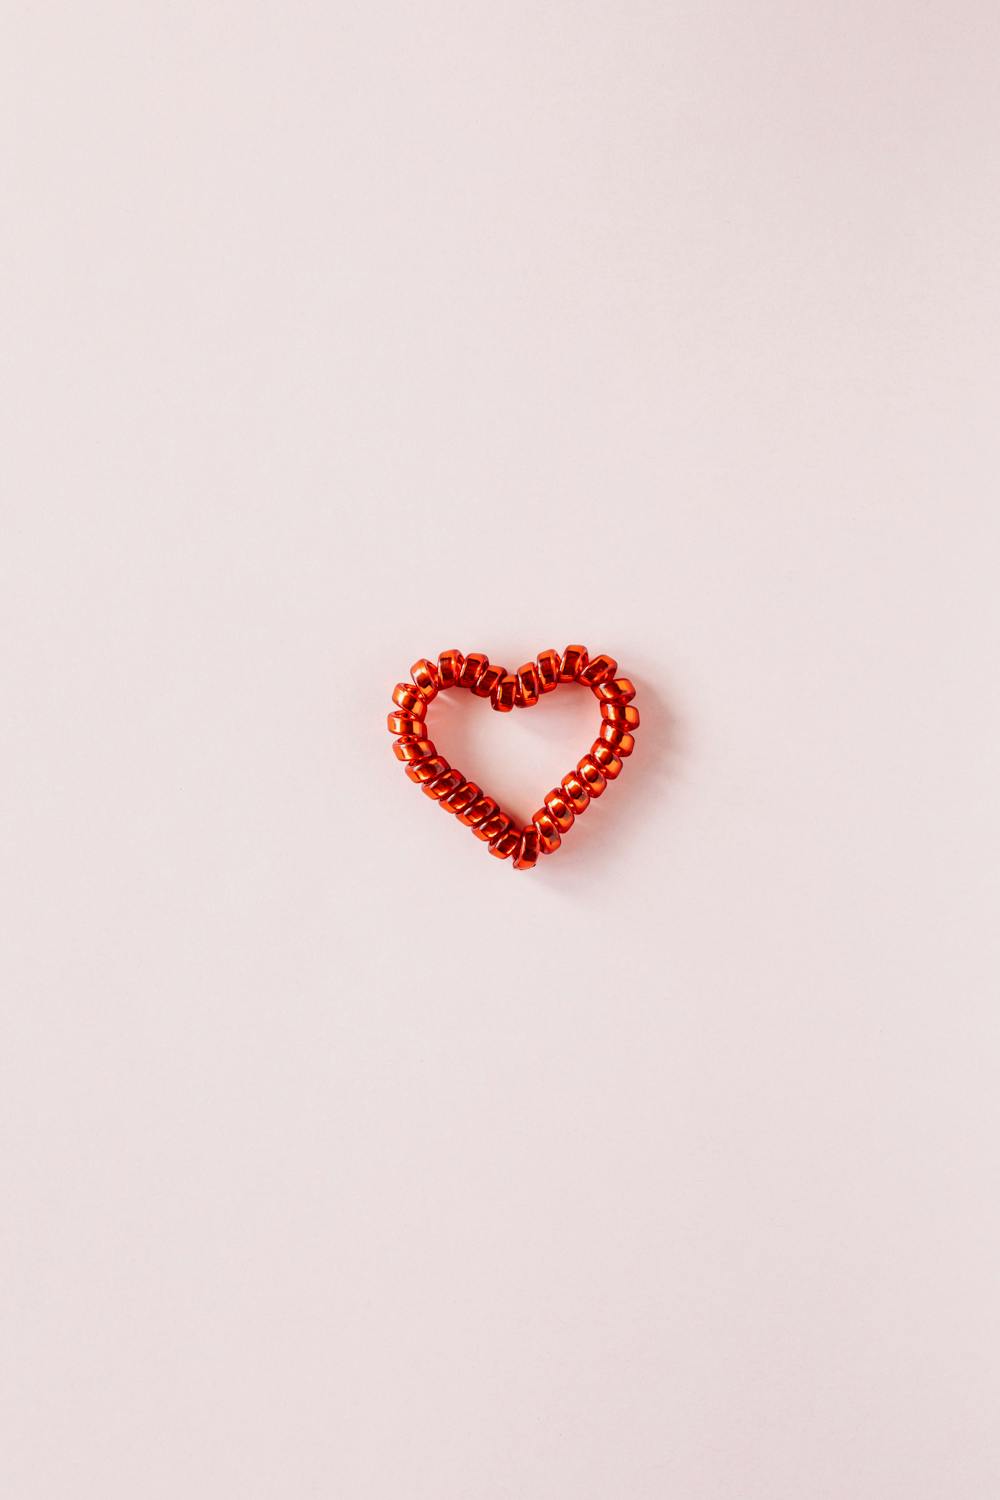 Red heart made of coil hair tie on pink background · Free Stock Photo